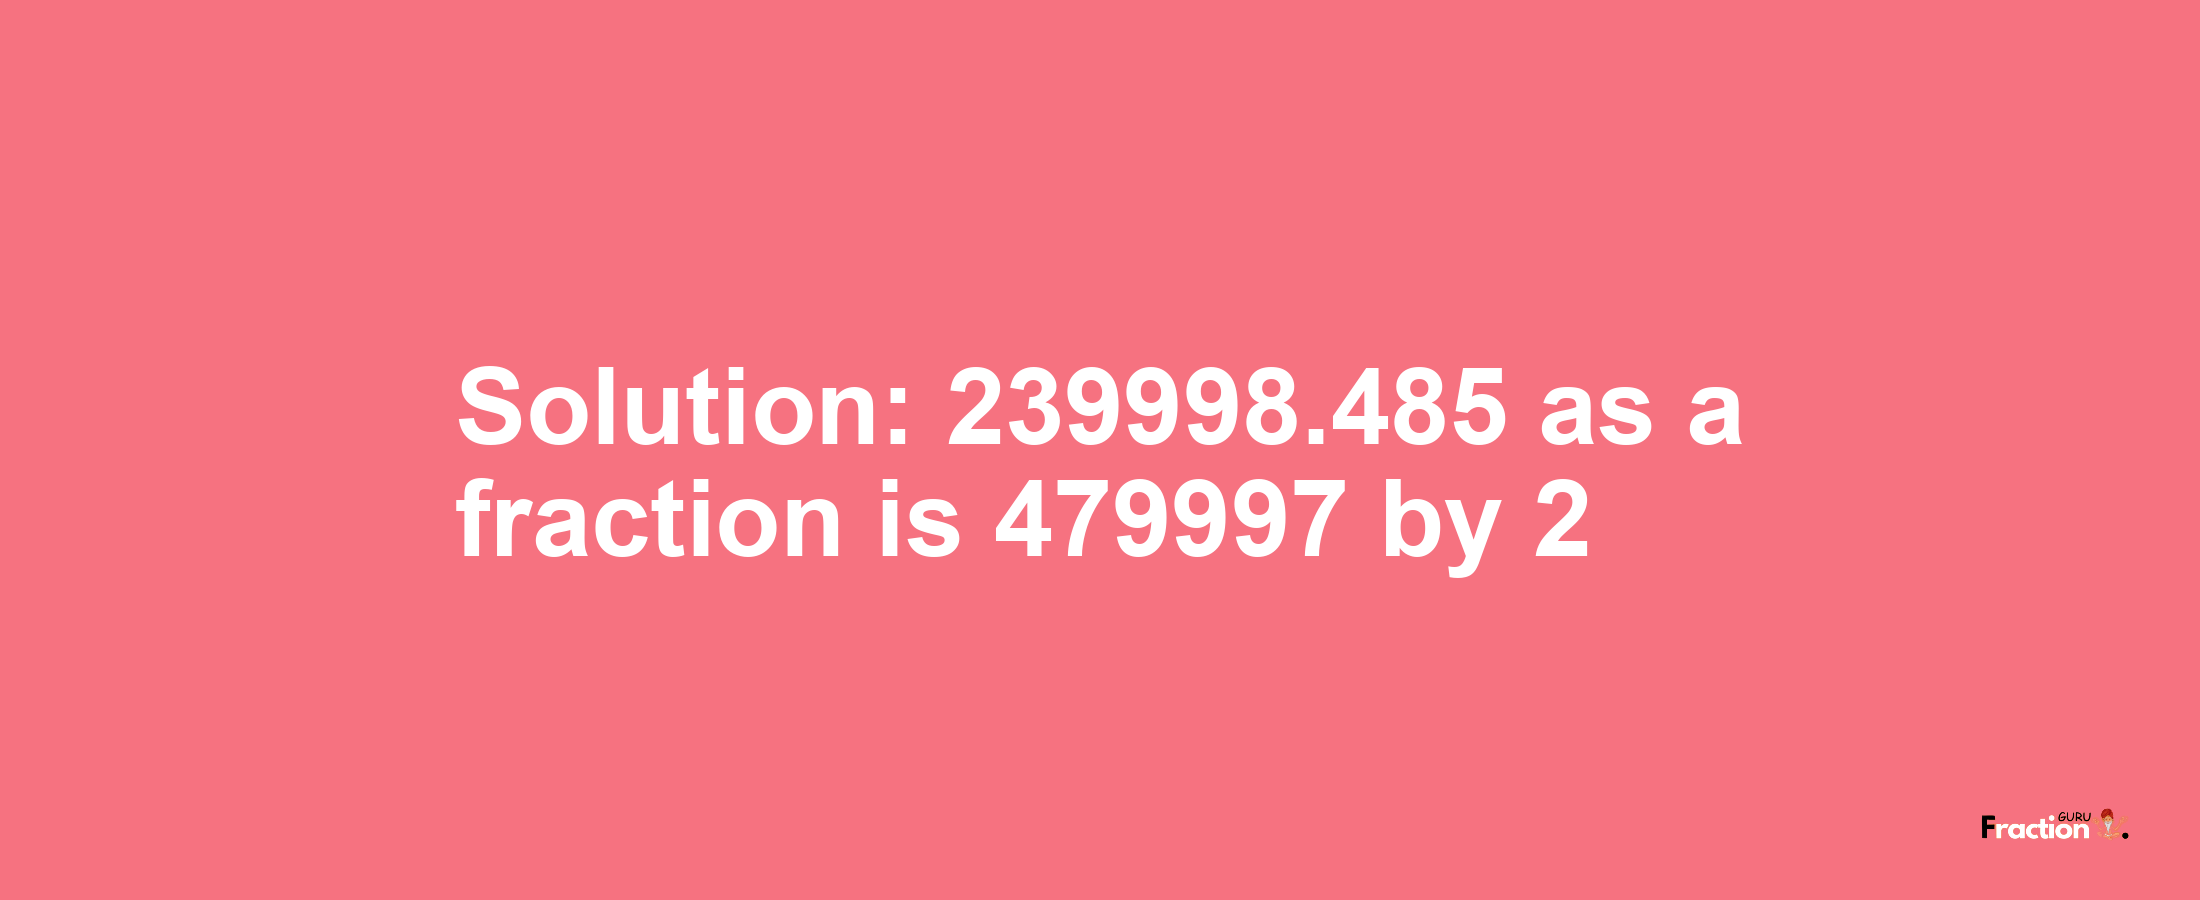 Solution:239998.485 as a fraction is 479997/2